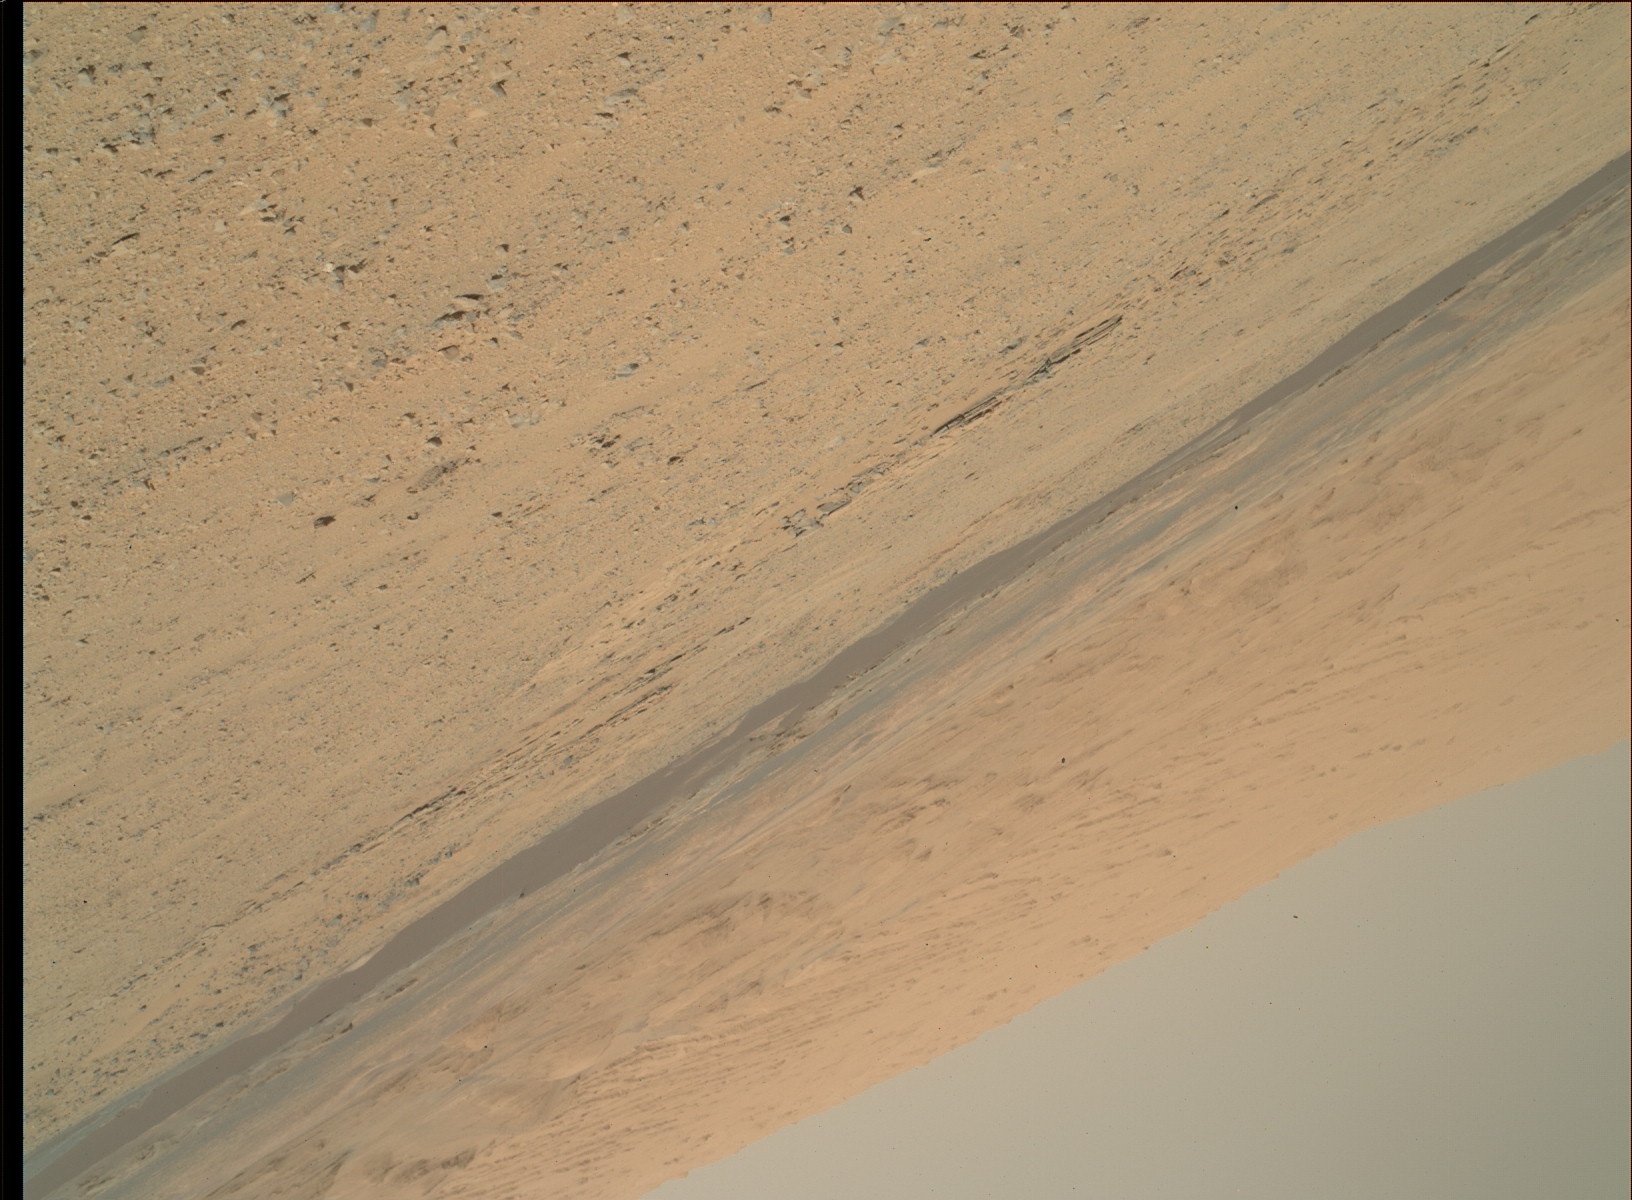 Nasa's Mars rover Curiosity acquired this image using its Mars Hand Lens Imager (MAHLI) on Sol 661